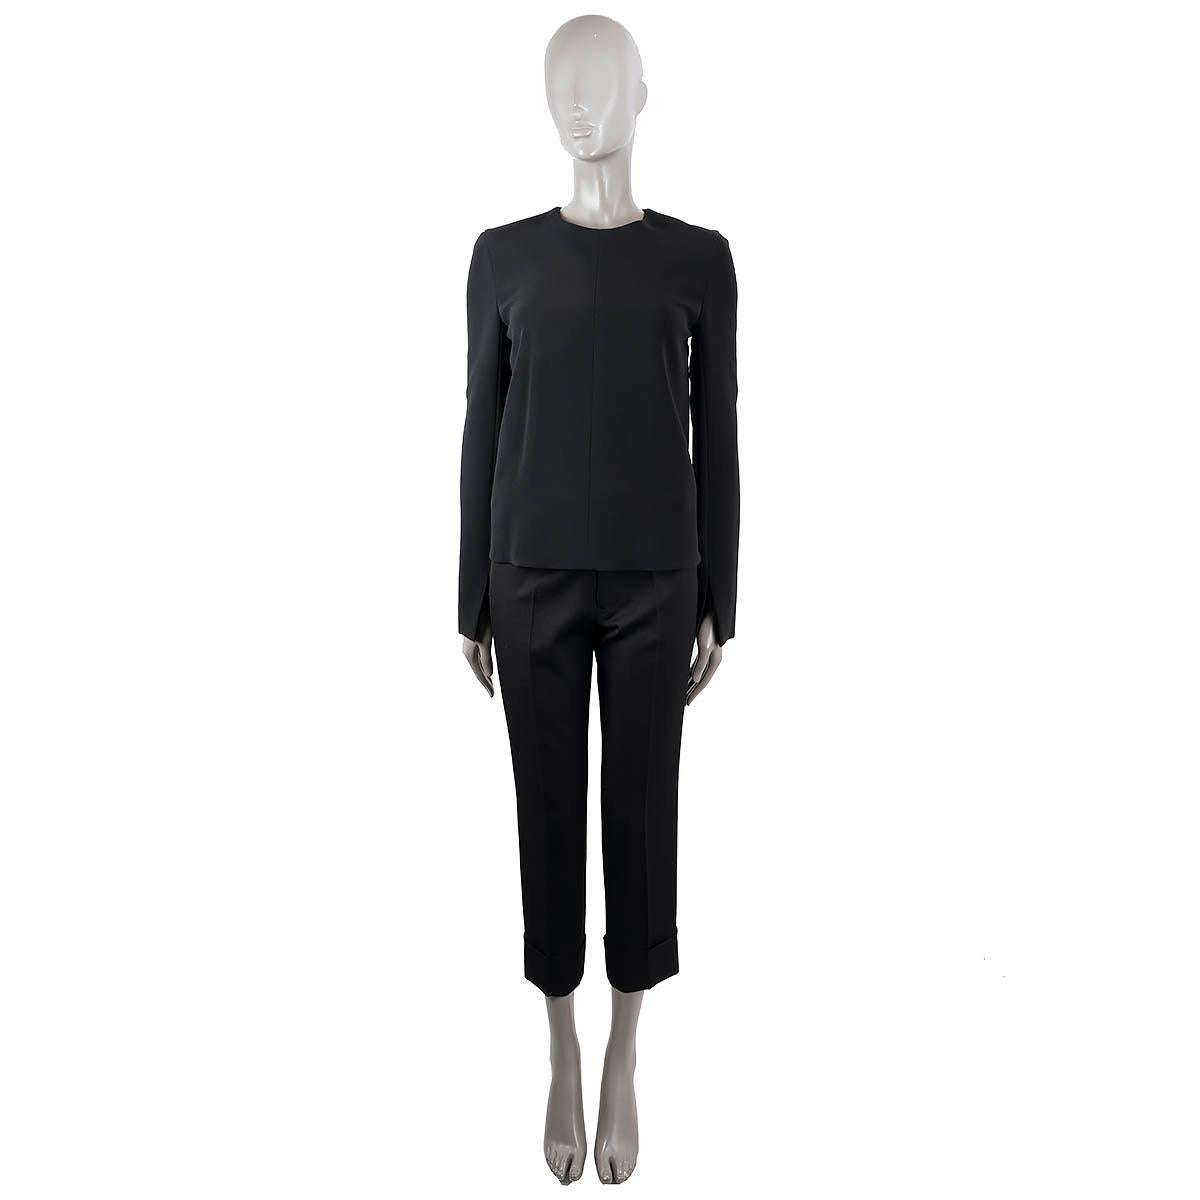 100% authentic Céline long sleeve Top in black viscose (50%), acetate (42%) and elastane (6%). Featured are two zipper in the back and split cuffs. Opens with a zipper in the back. Lined in silk (100%). Has been worn and is in excellent